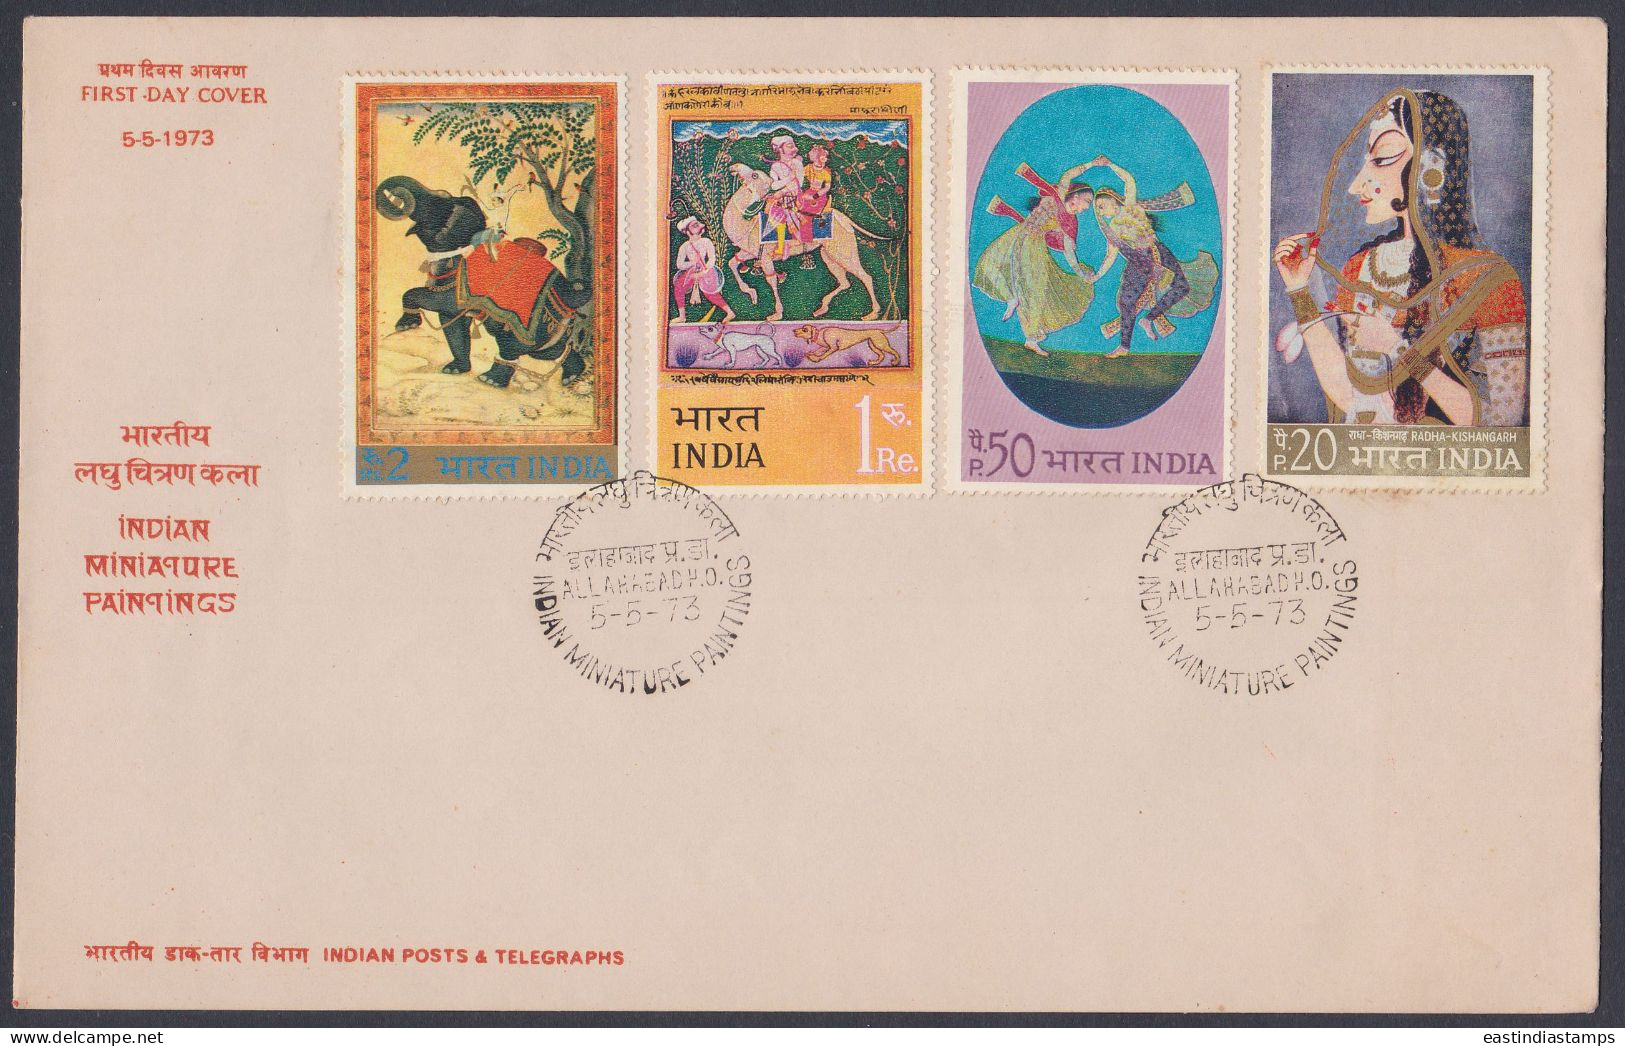 Inde India 1973 FDC Indian Miniature Paintings, Painting, Art, Arts, Painter, Horse, Royalty, Elephant, First Day Cover - Covers & Documents